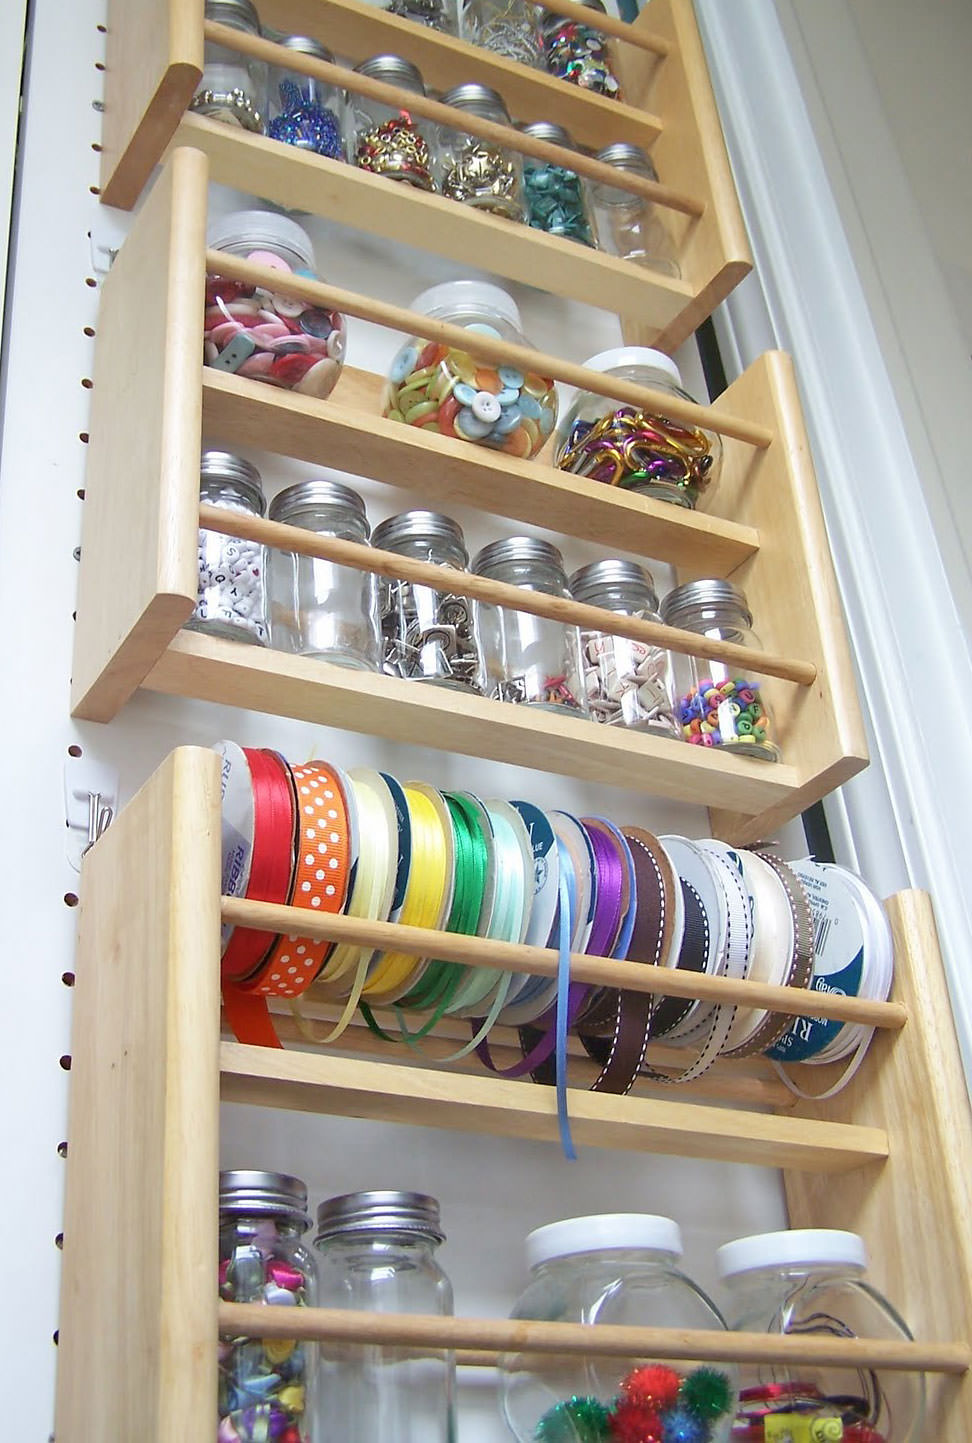 Diy Craft Room Organization : 7 Ways To Organize An Office Or Craft Room Creative Ramblings / Bring your dream sewing room to life with these organization tips.